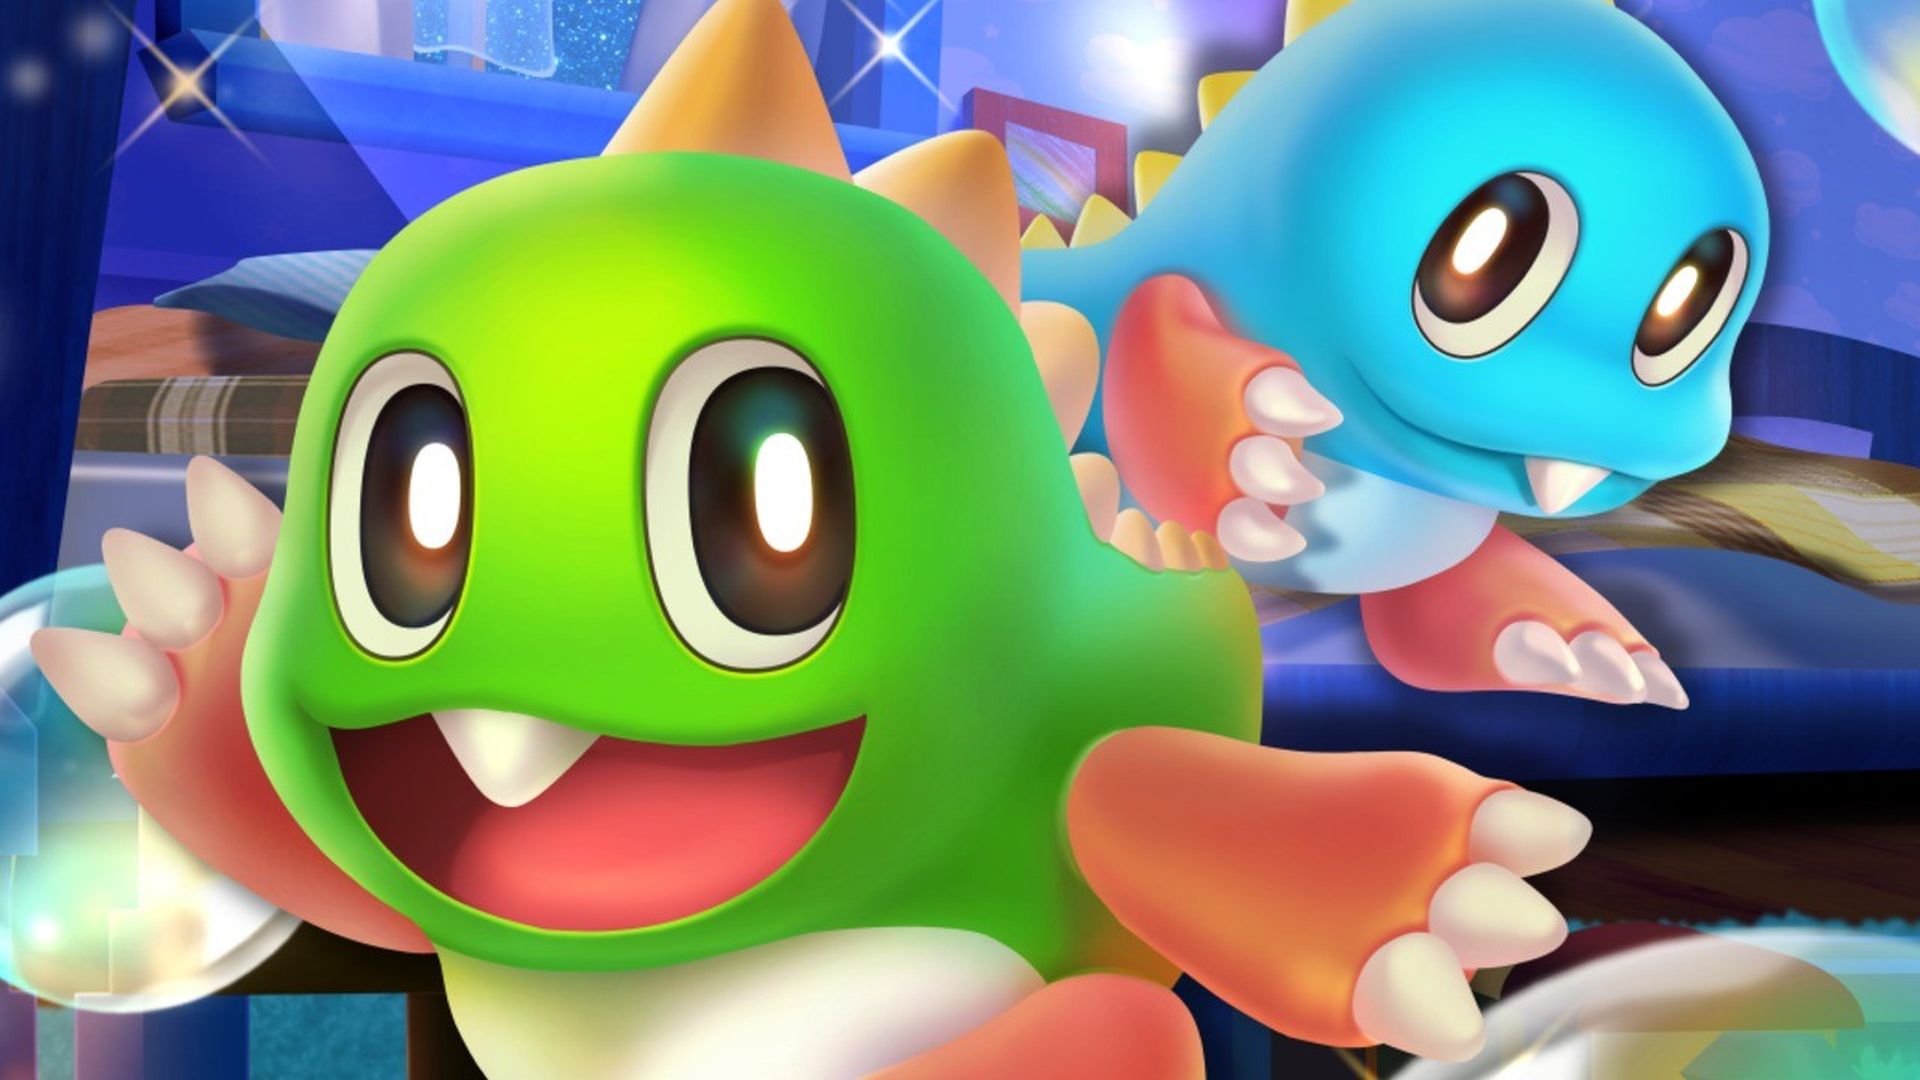 “We wanted to make a game all fans can enjoy”: Taito talks bringing an arcade icon to PlayStation with Bubble Bobble 4 Friends